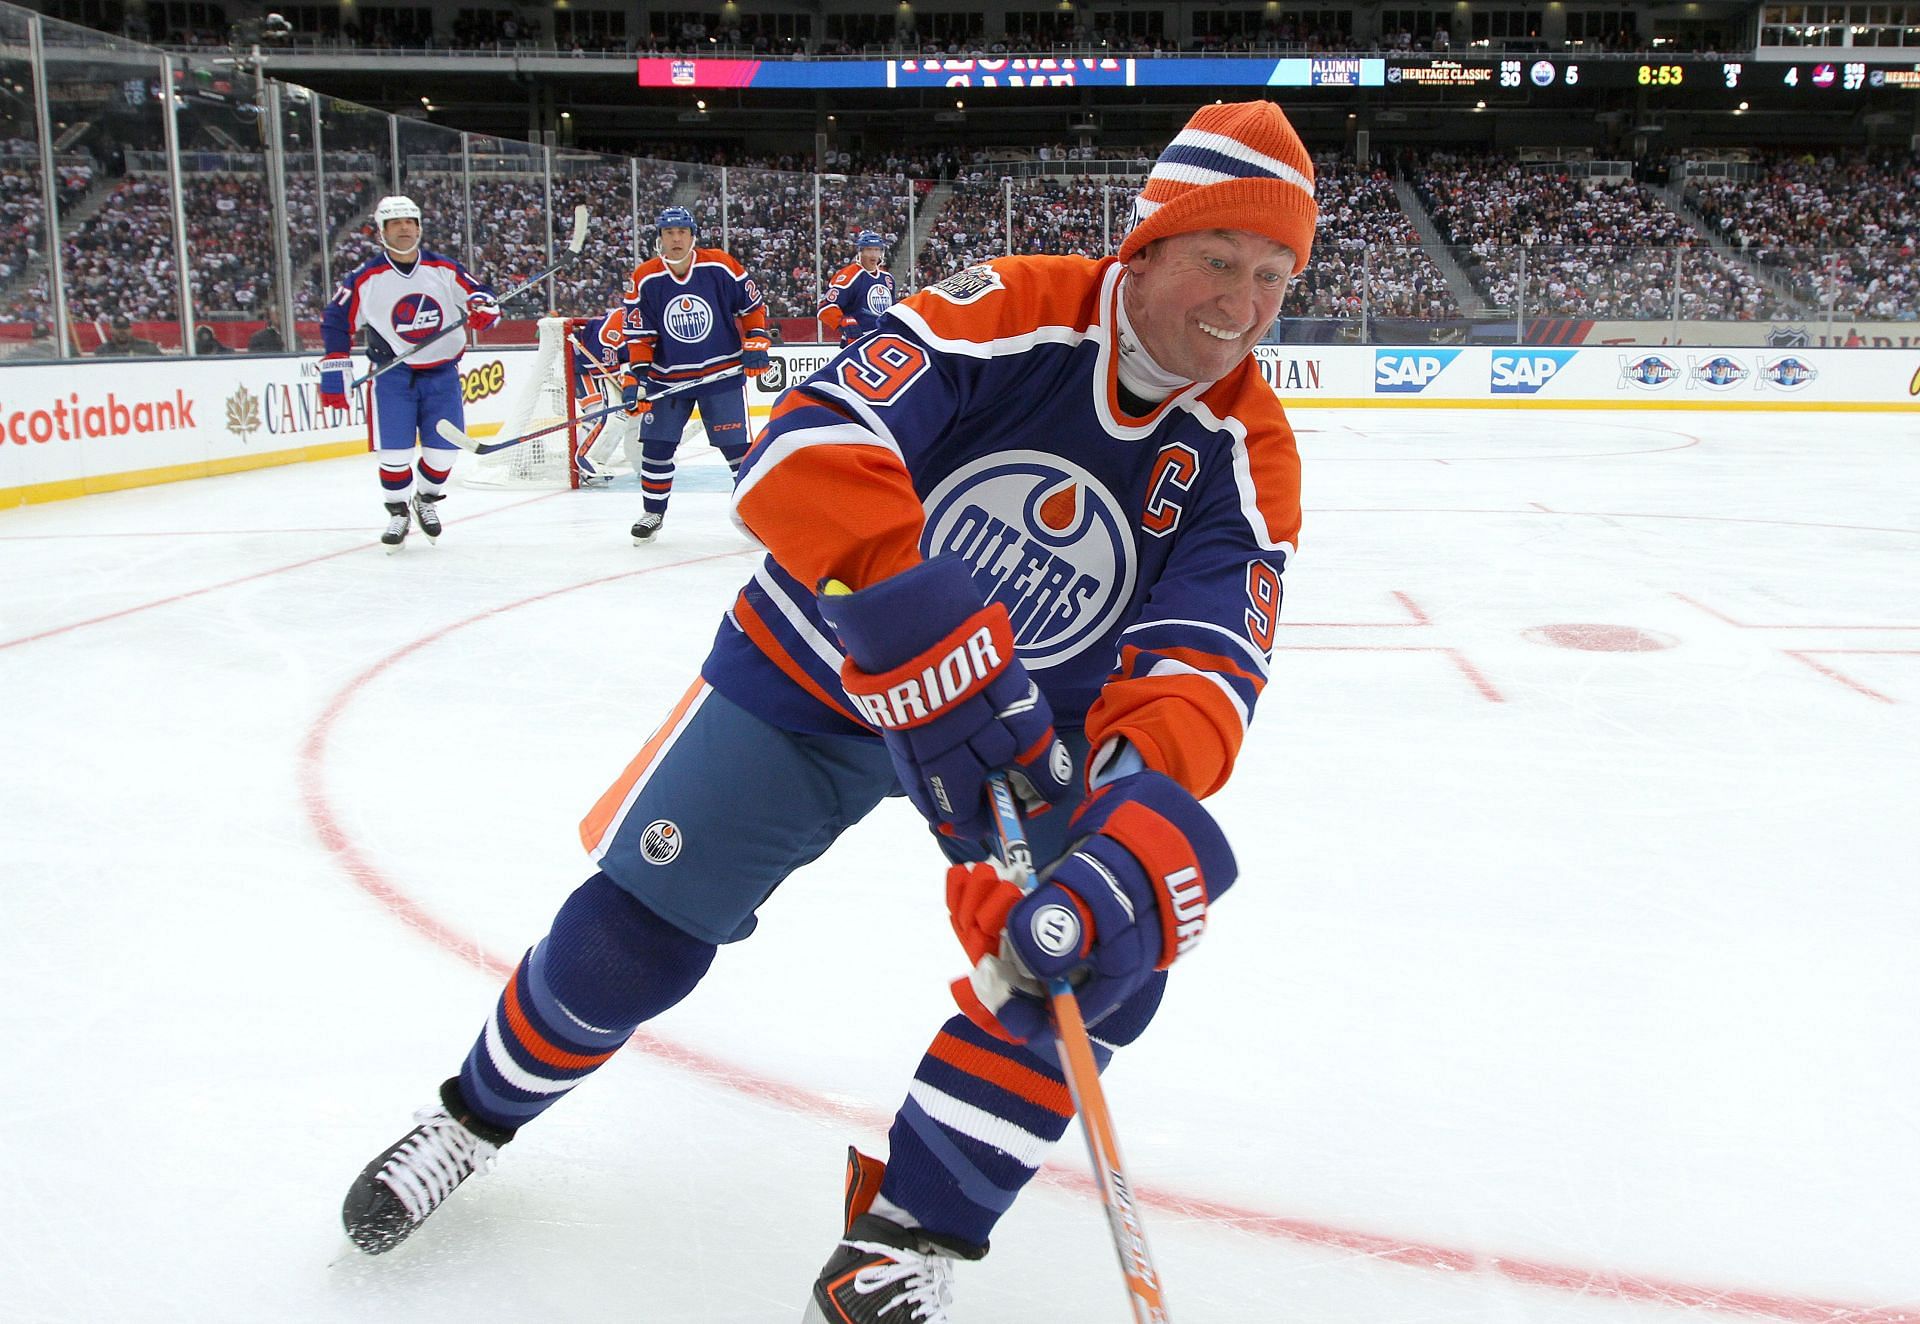 Gretzky compiled 583 goals and 1086 assists with the Oilers from 1979-1988